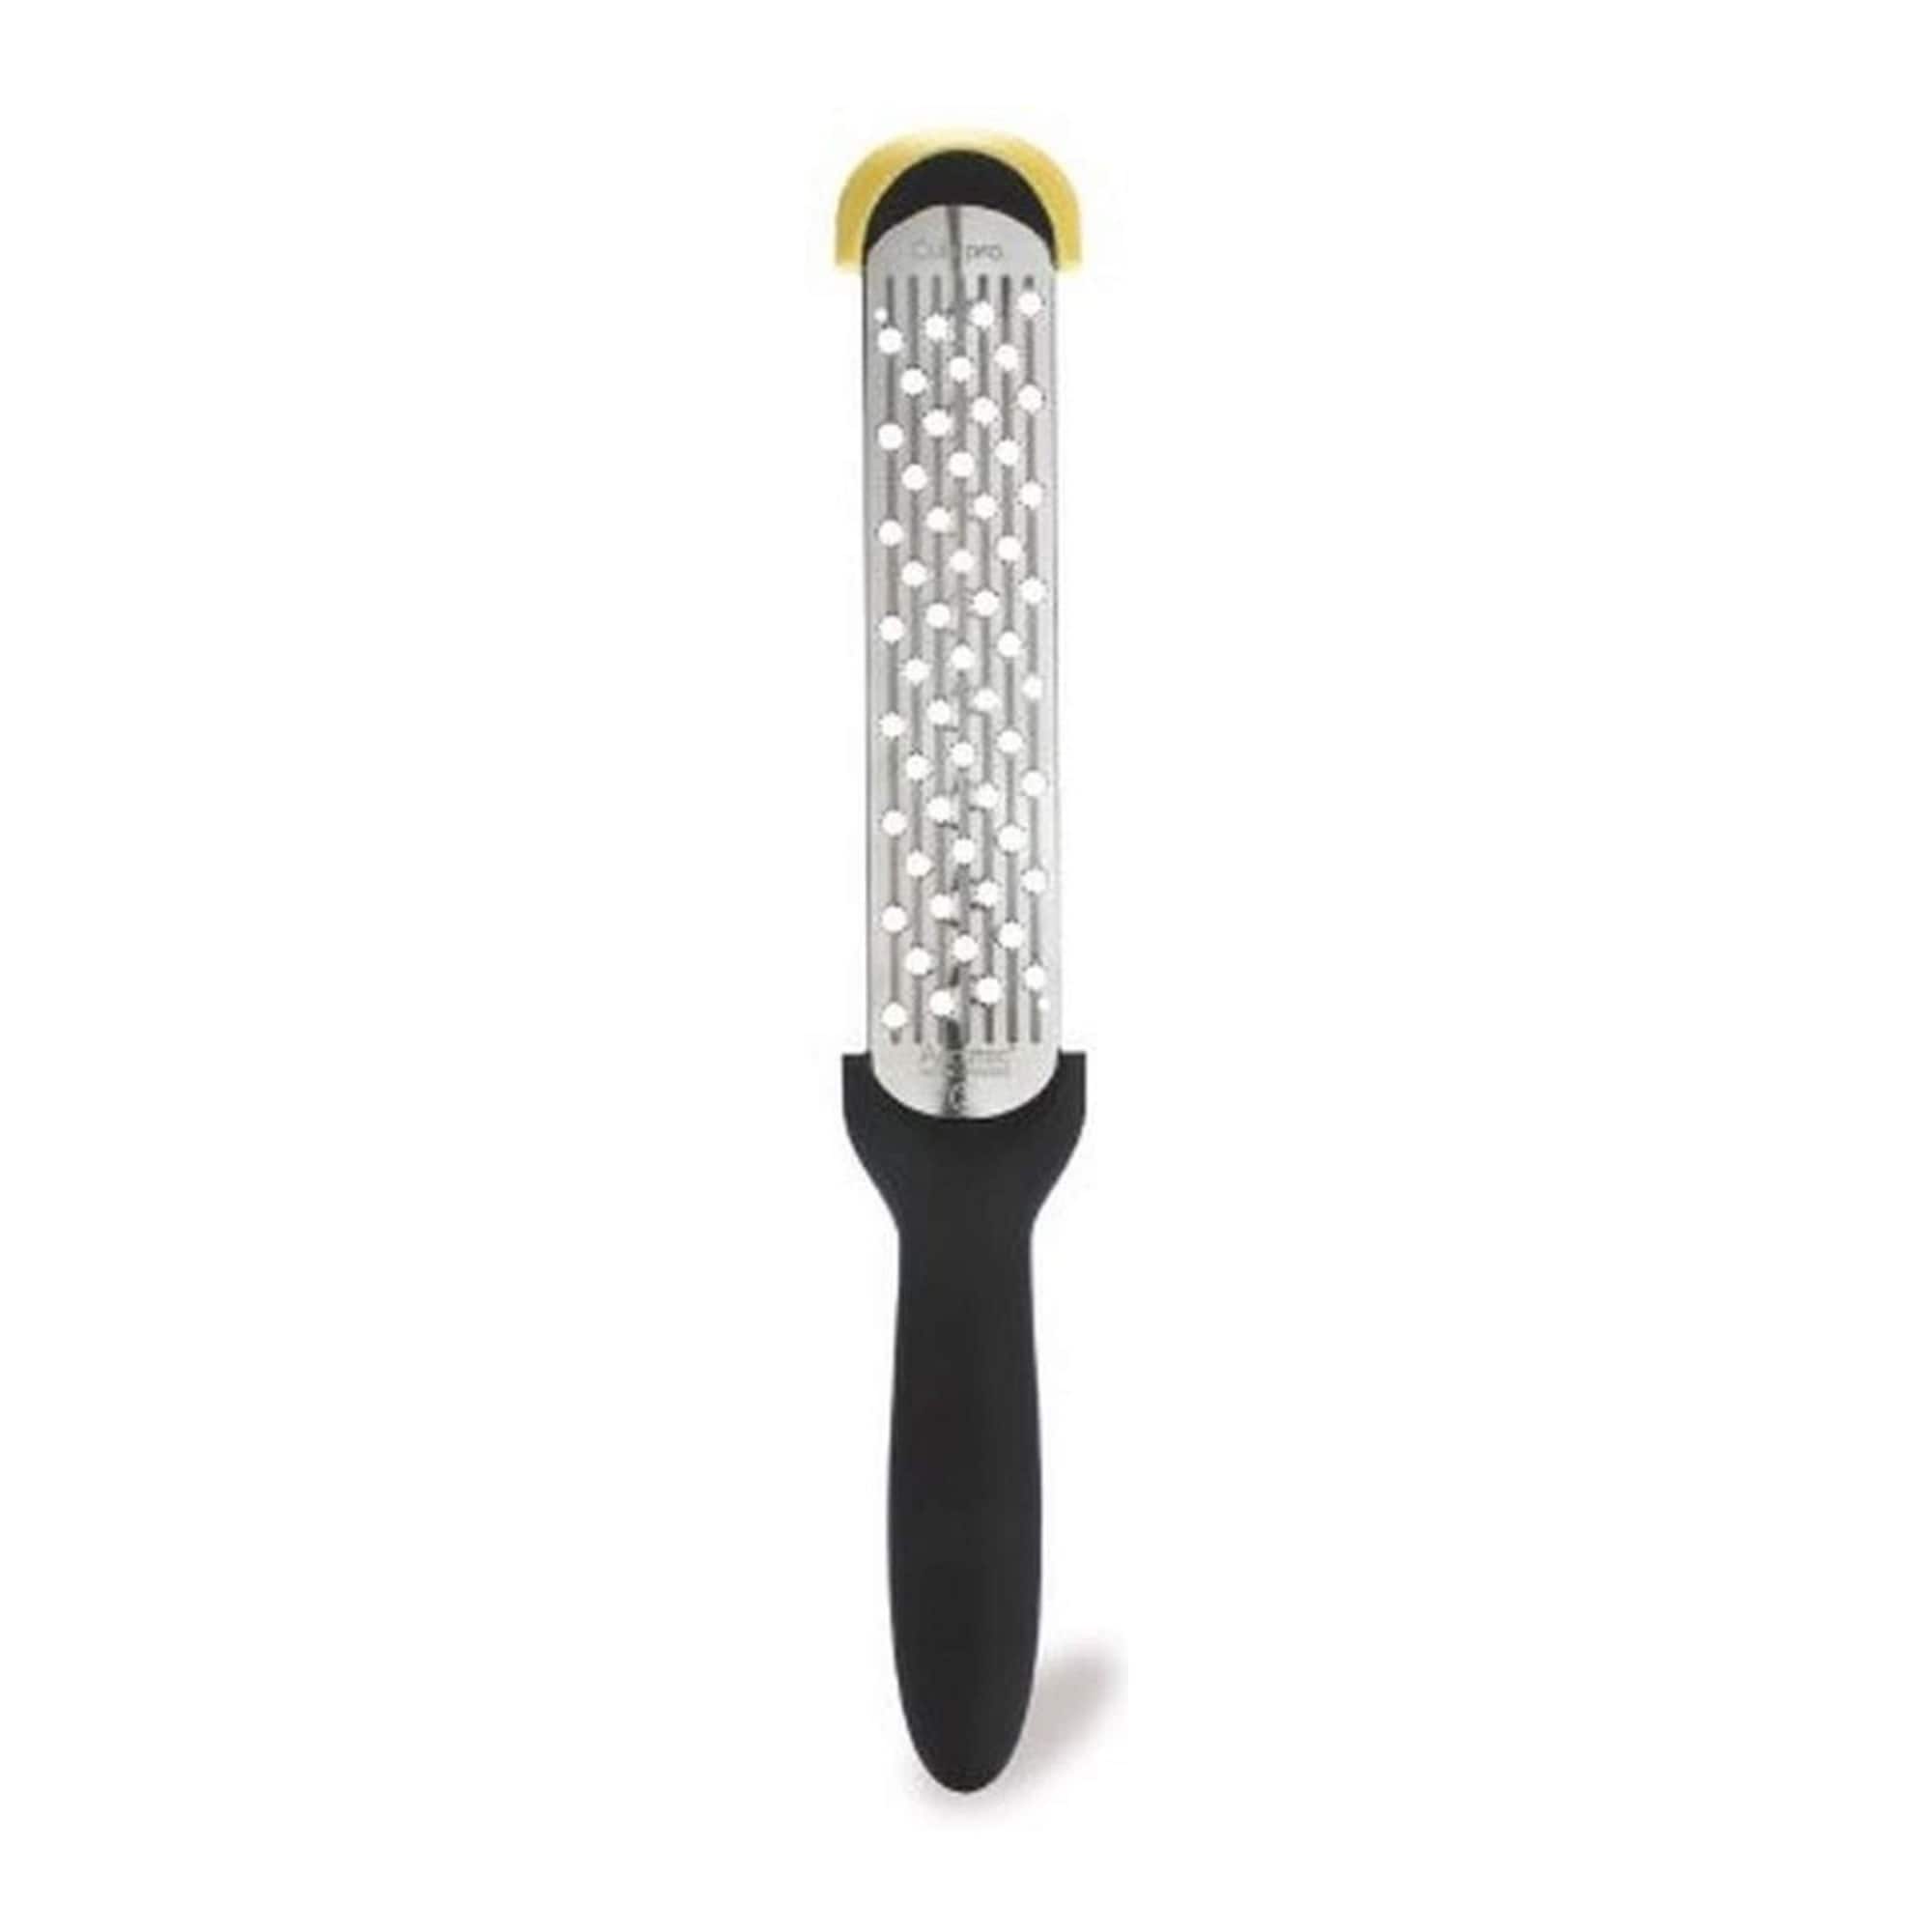 Cuisipro Parmesan Rasp Grater with Surface Glide Technology - Bed